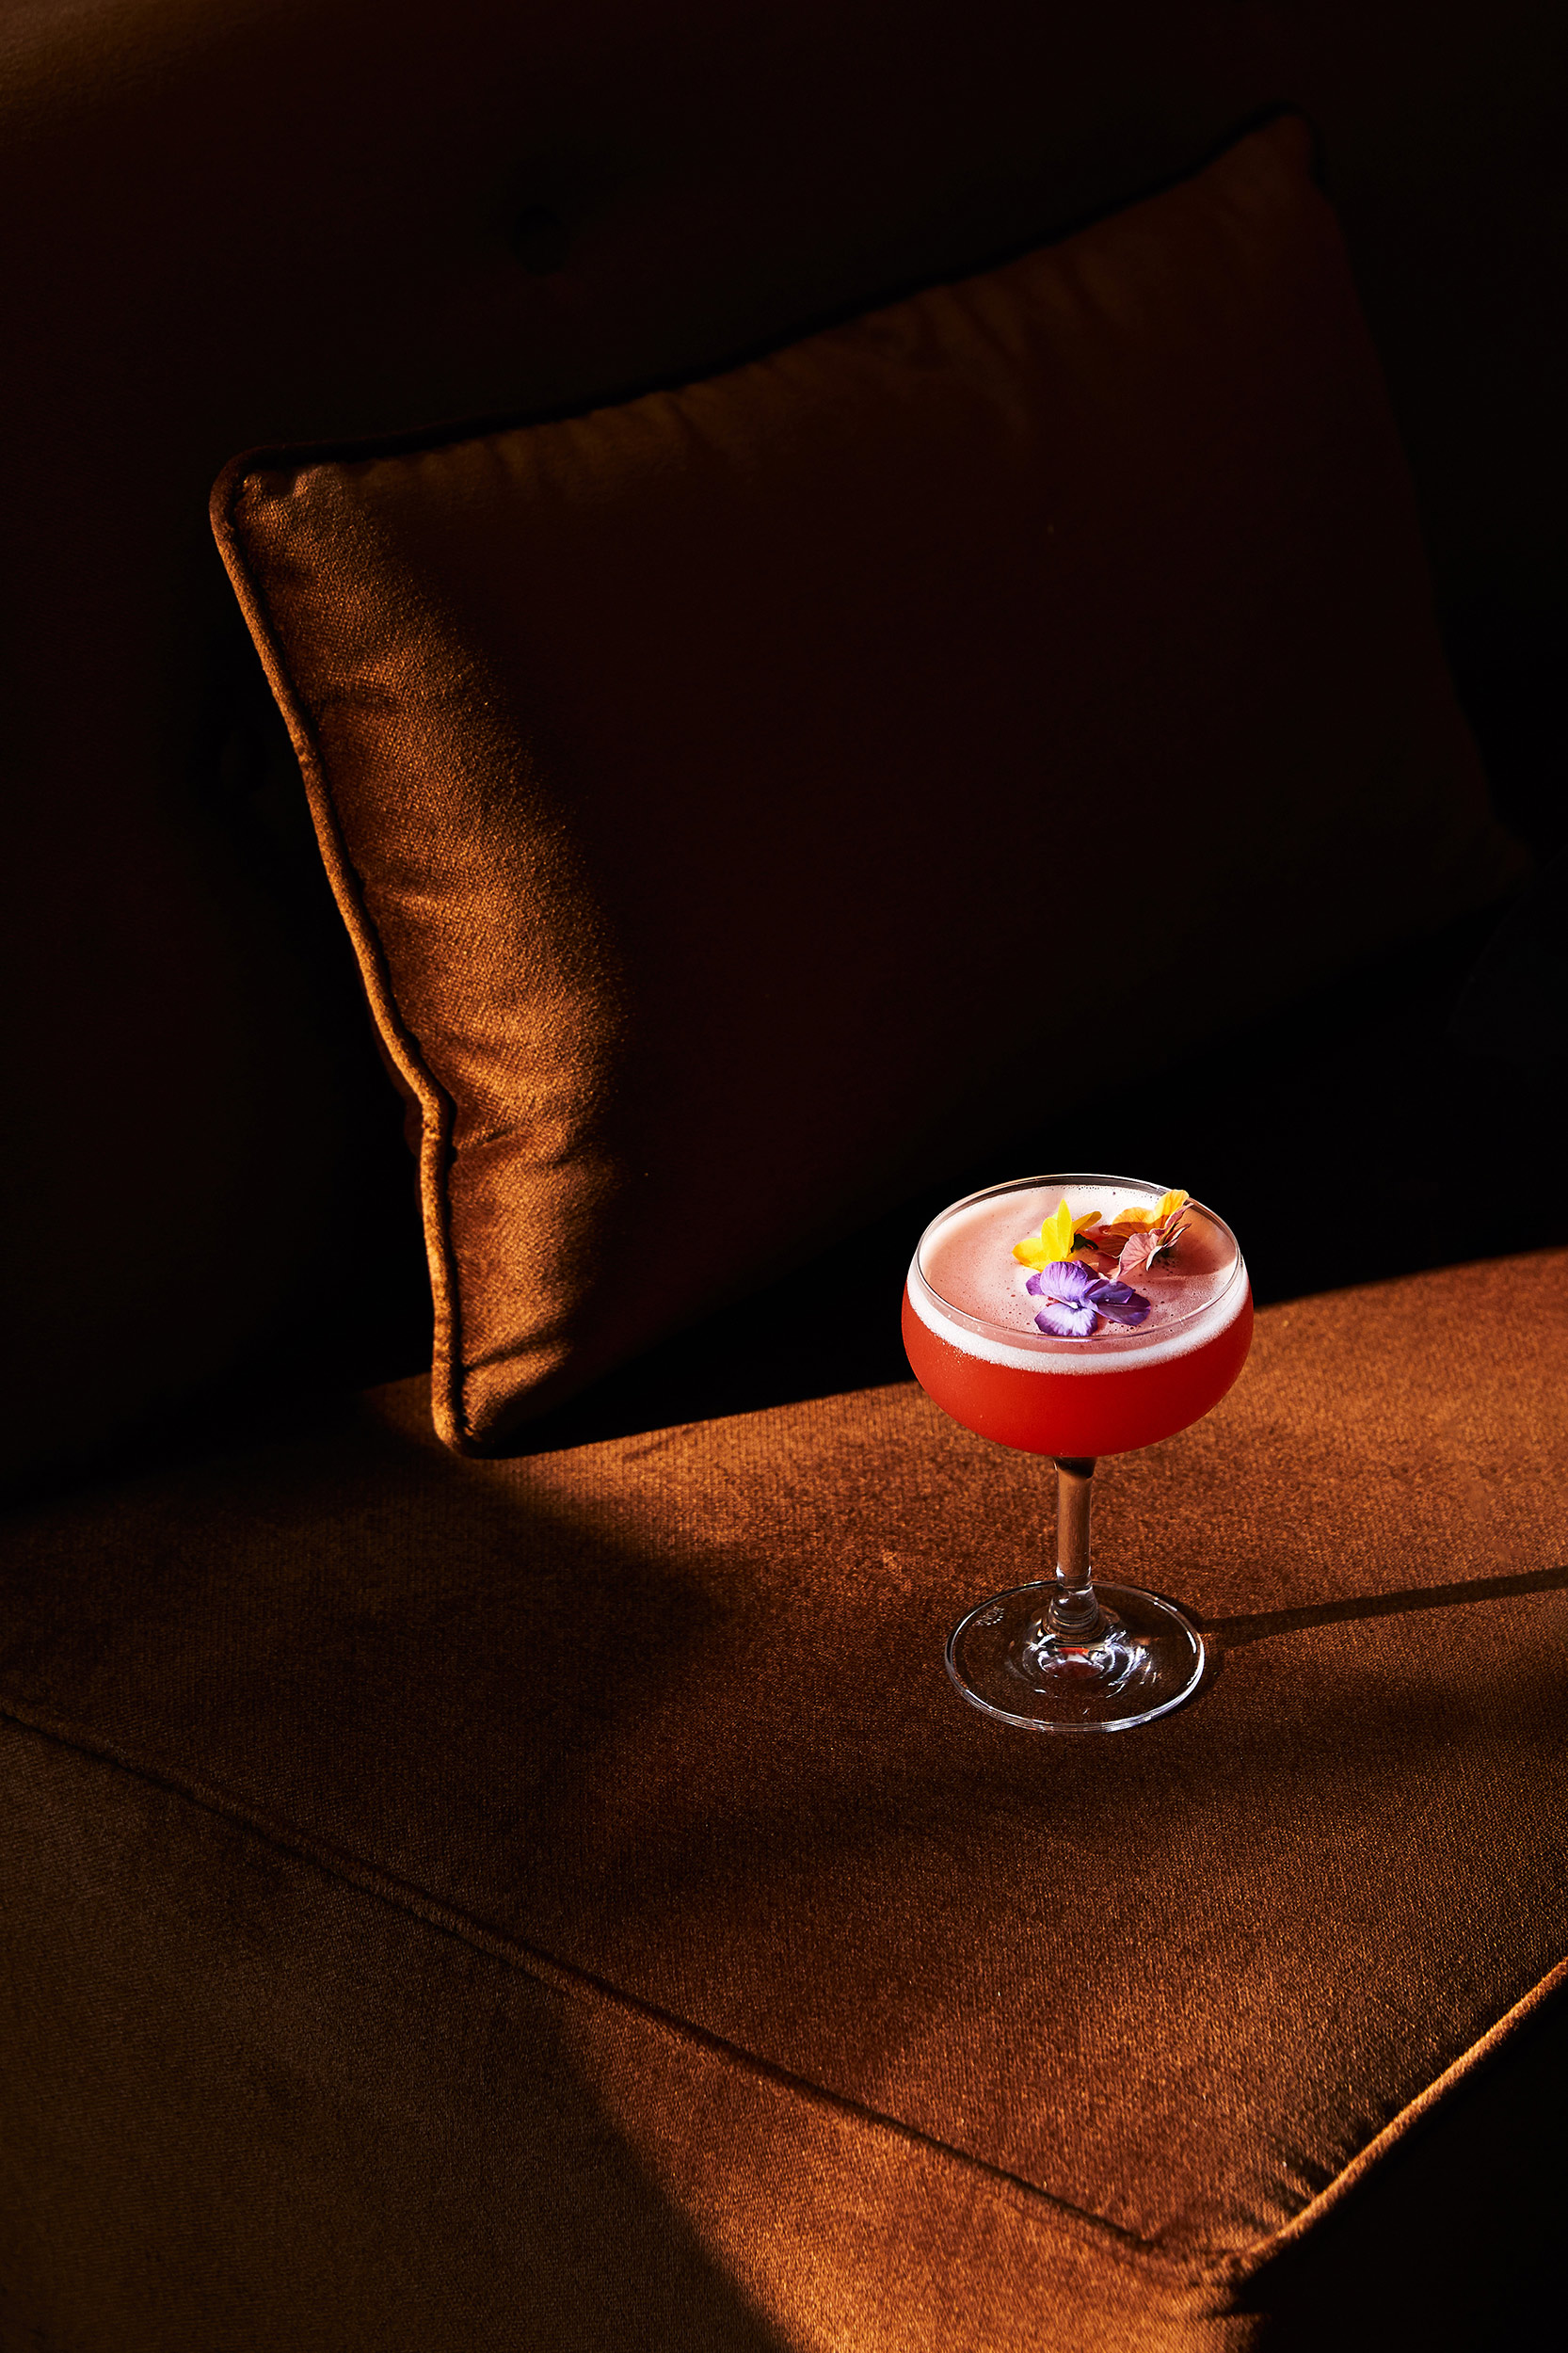 Cocktail photography for Rosewood Hotels by Nico Schinco